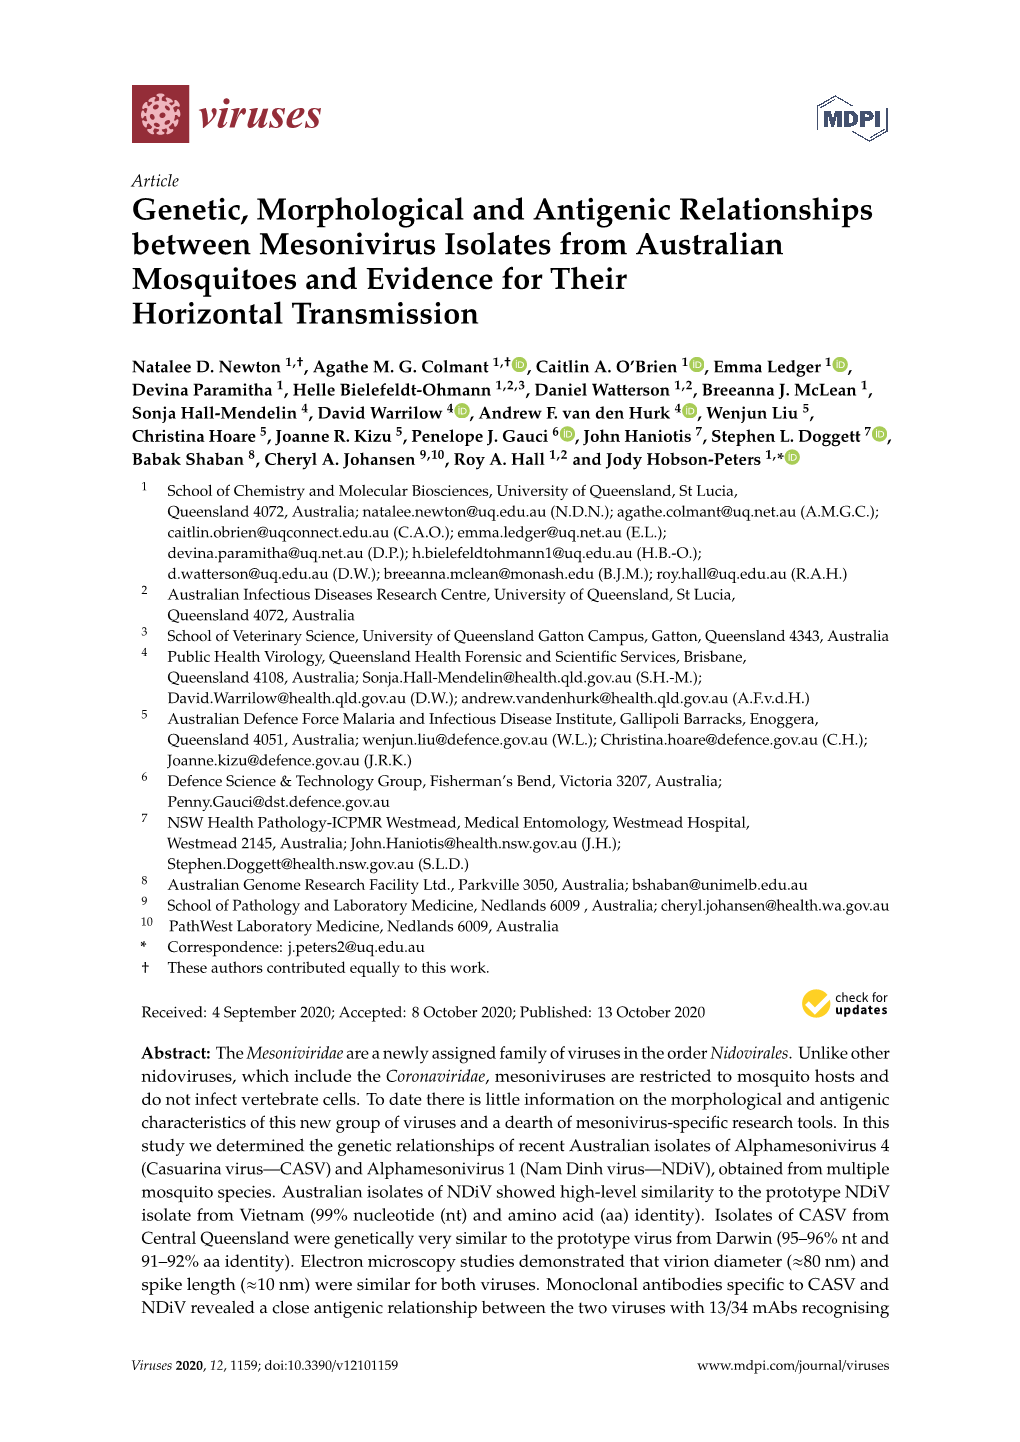 Genetic, Morphological and Antigenic Relationships Between Mesonivirus Isolates from Australian Mosquitoes and Evidence for Their Horizontal Transmission